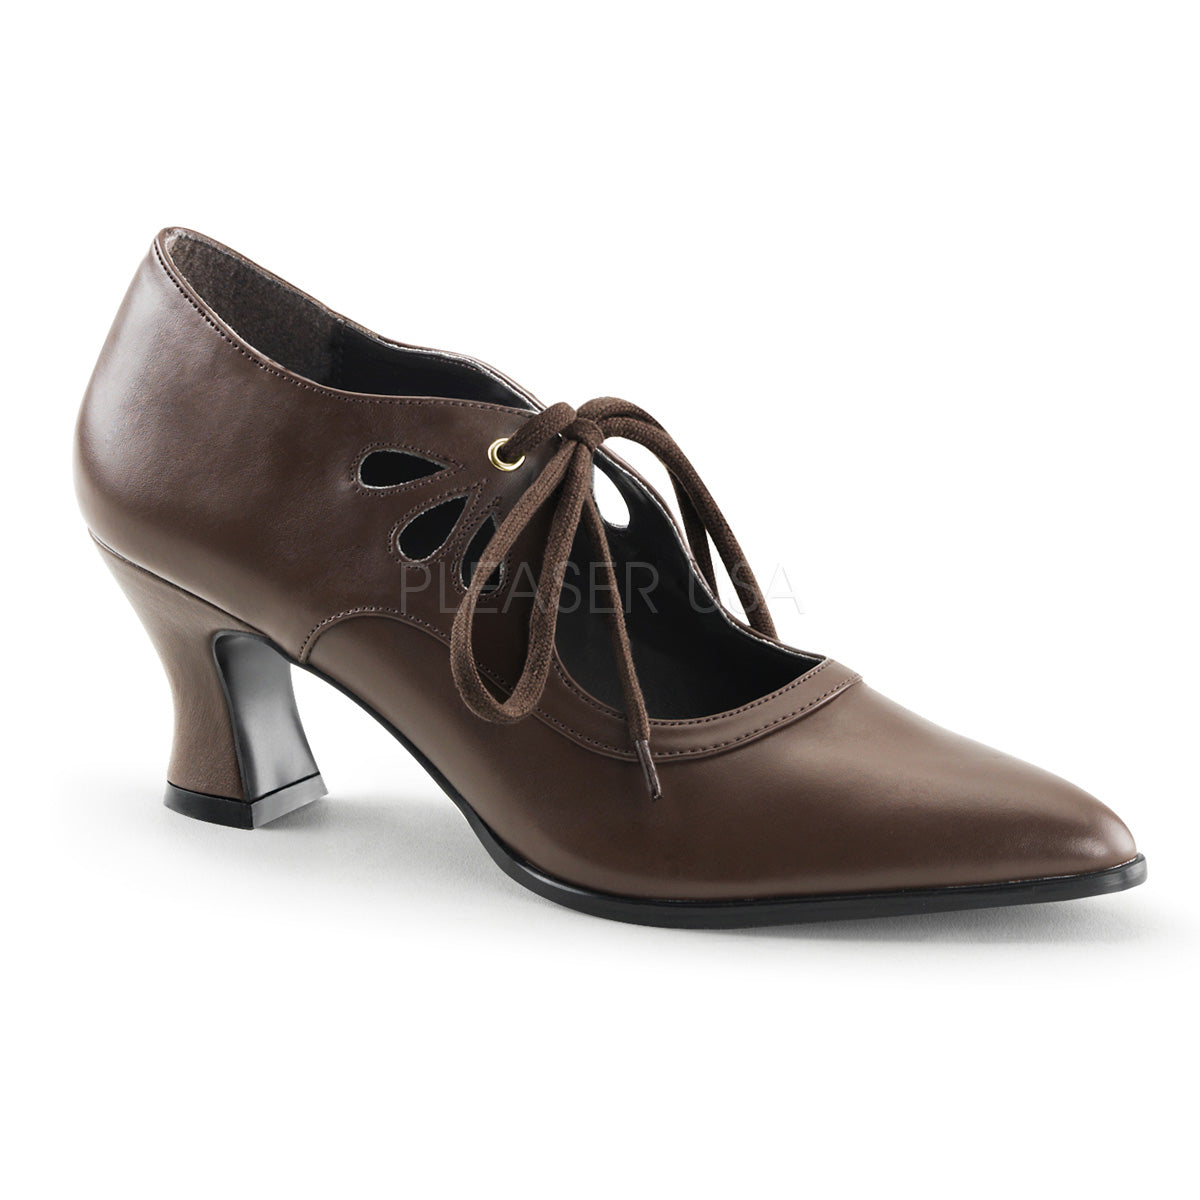 Victorian style brown shoes